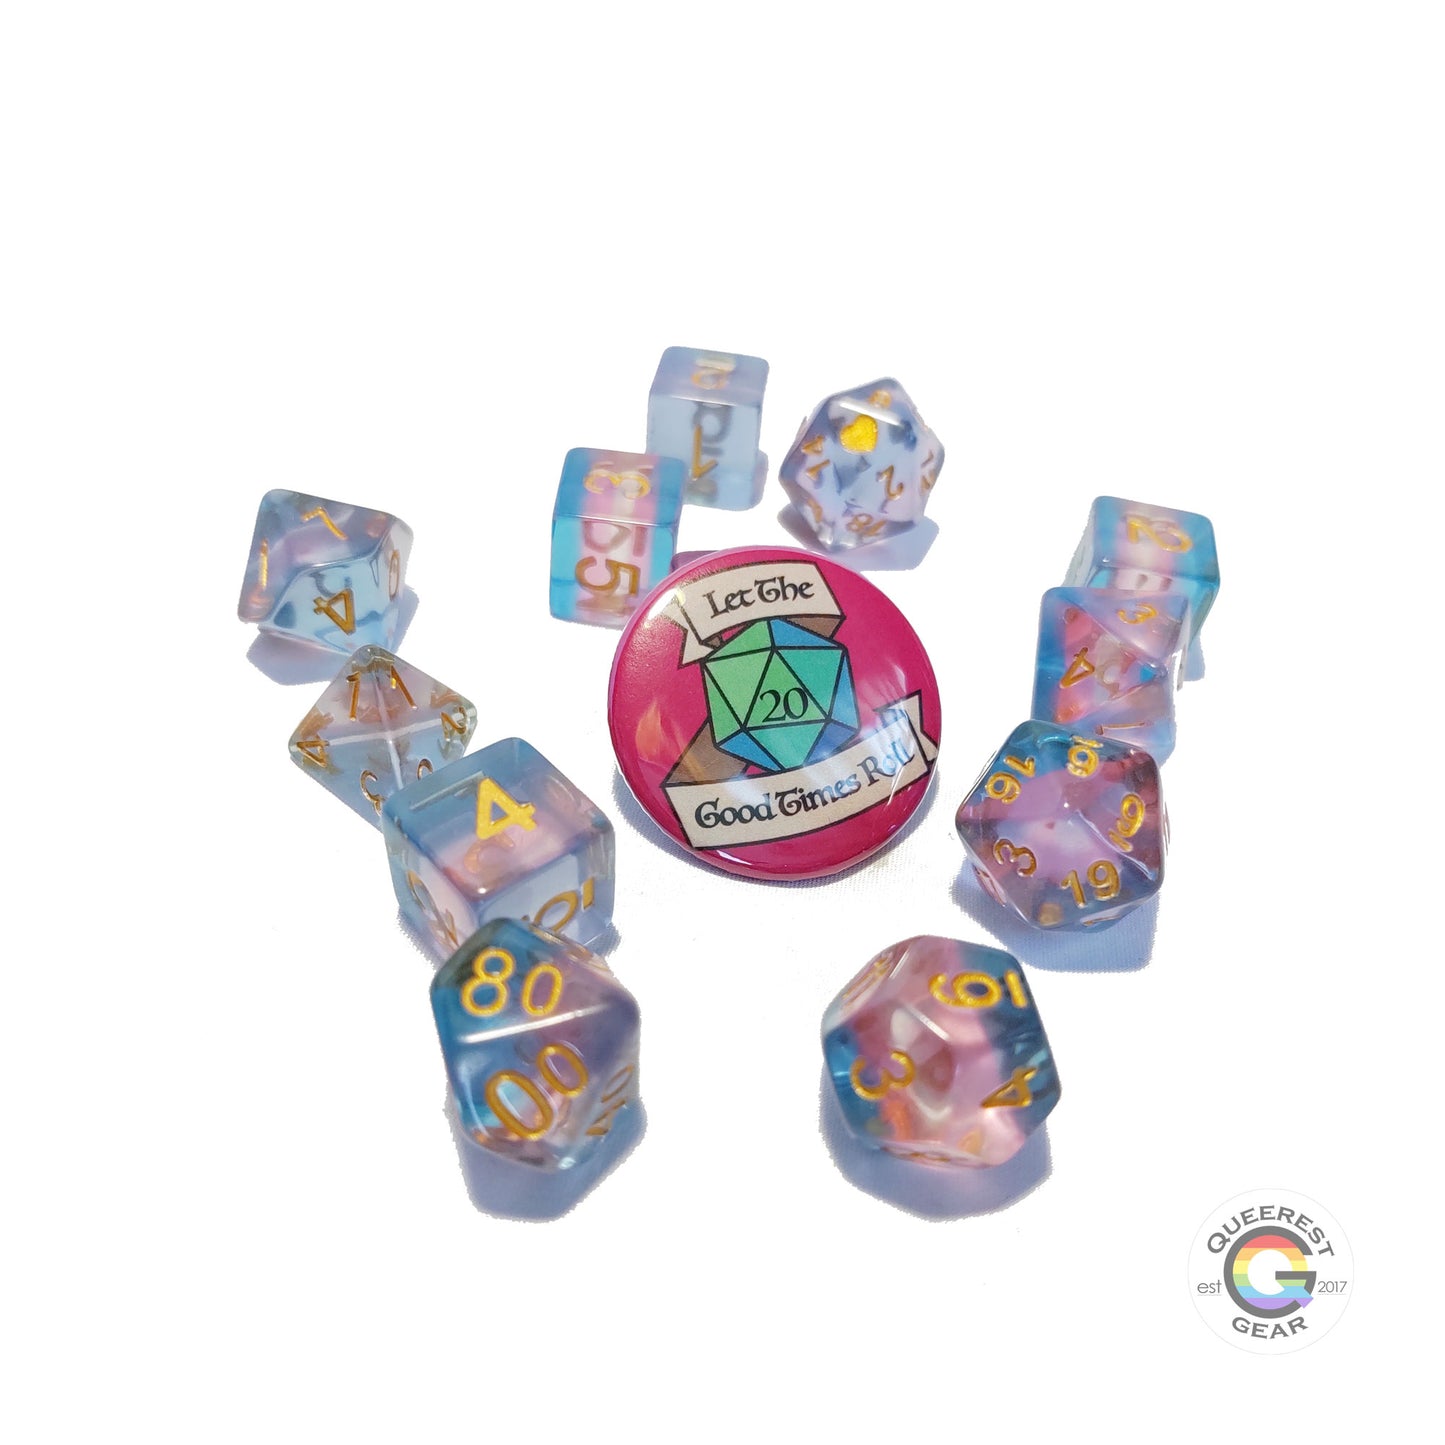 11 piece set of polyhedral dice scattered on a white background. They are transparent and colored in the stripes of the transgender flag with gold ink. There is the freebie “let the good times roll” pinback button among them. 